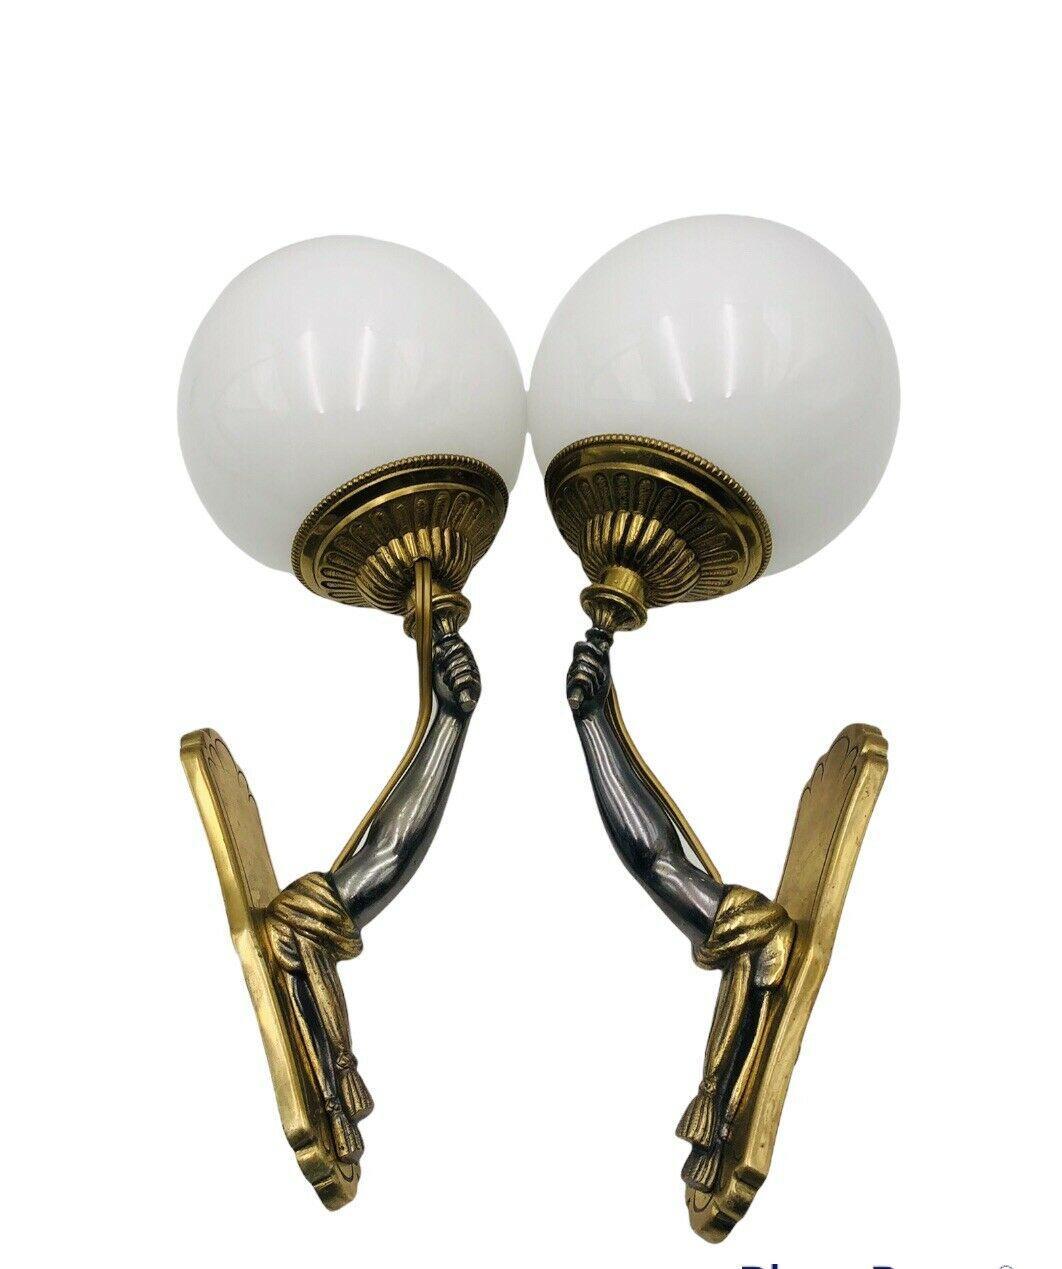 Pair 1940's Gilt Bronze Hollywood Regency Slender and Elegant Arm/ Fist Light Bearers. The outstretched arms are holding the light source. Opaline glass shades.